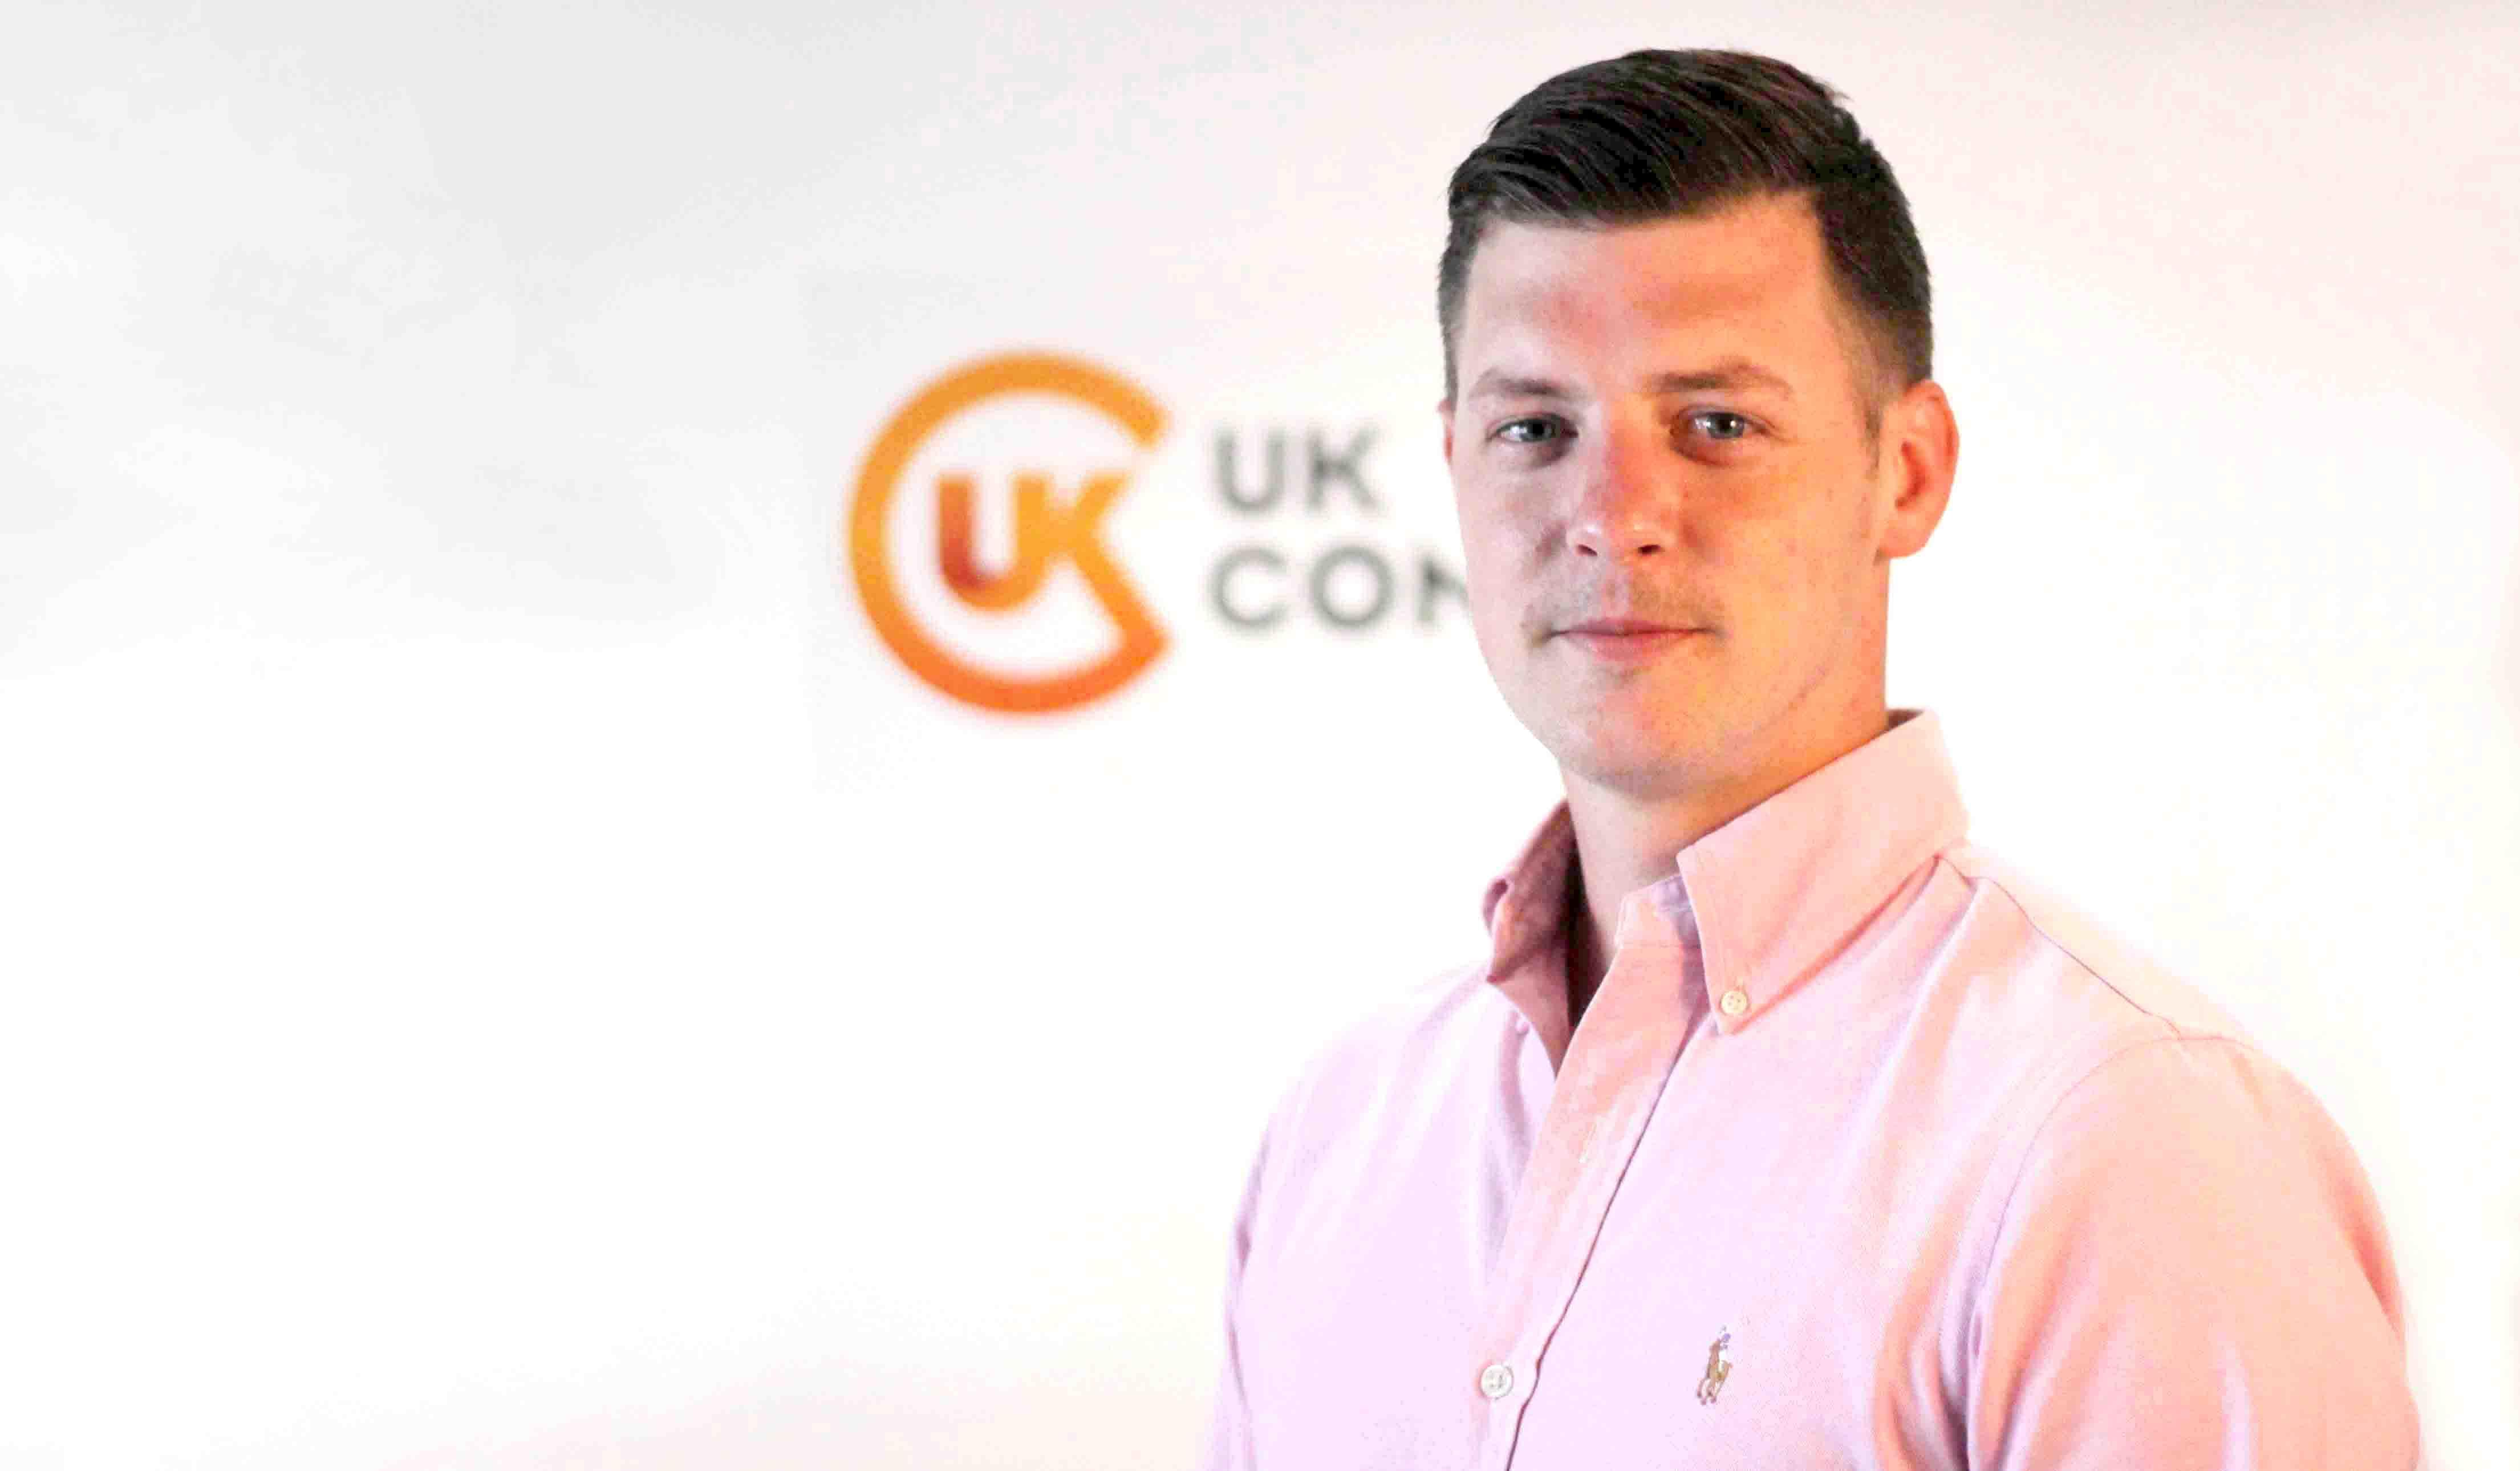 PJ Farr, Connect UK managing director and founder